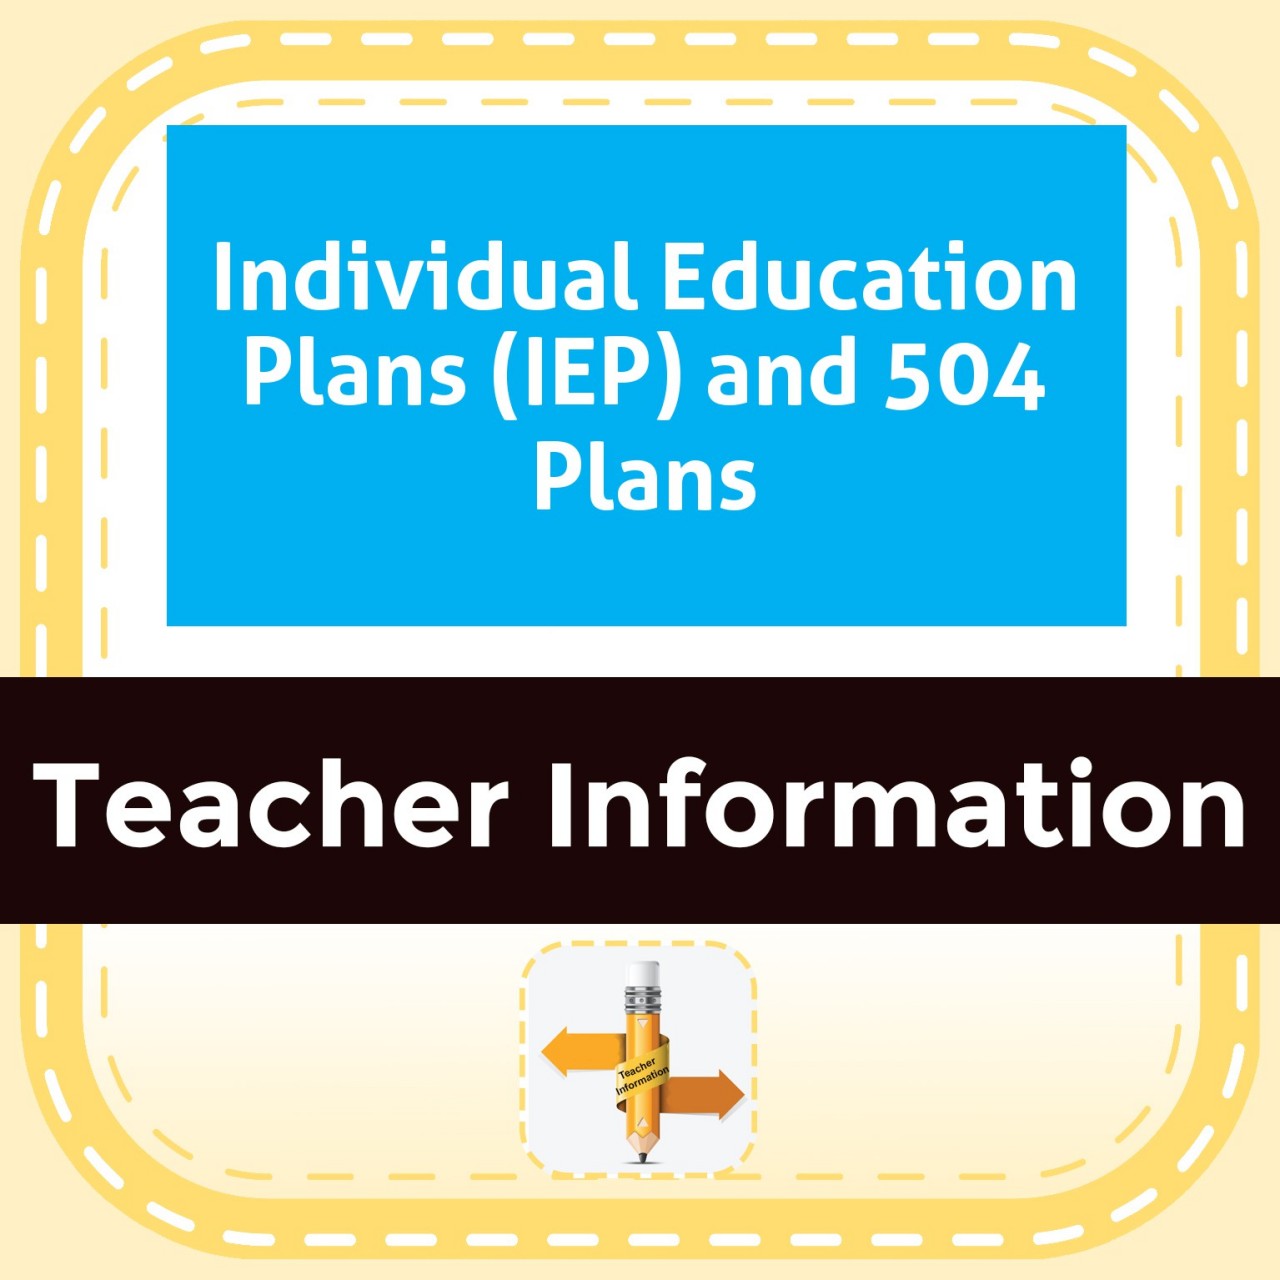 Individual Education Plans (IEP) and 504 Plans